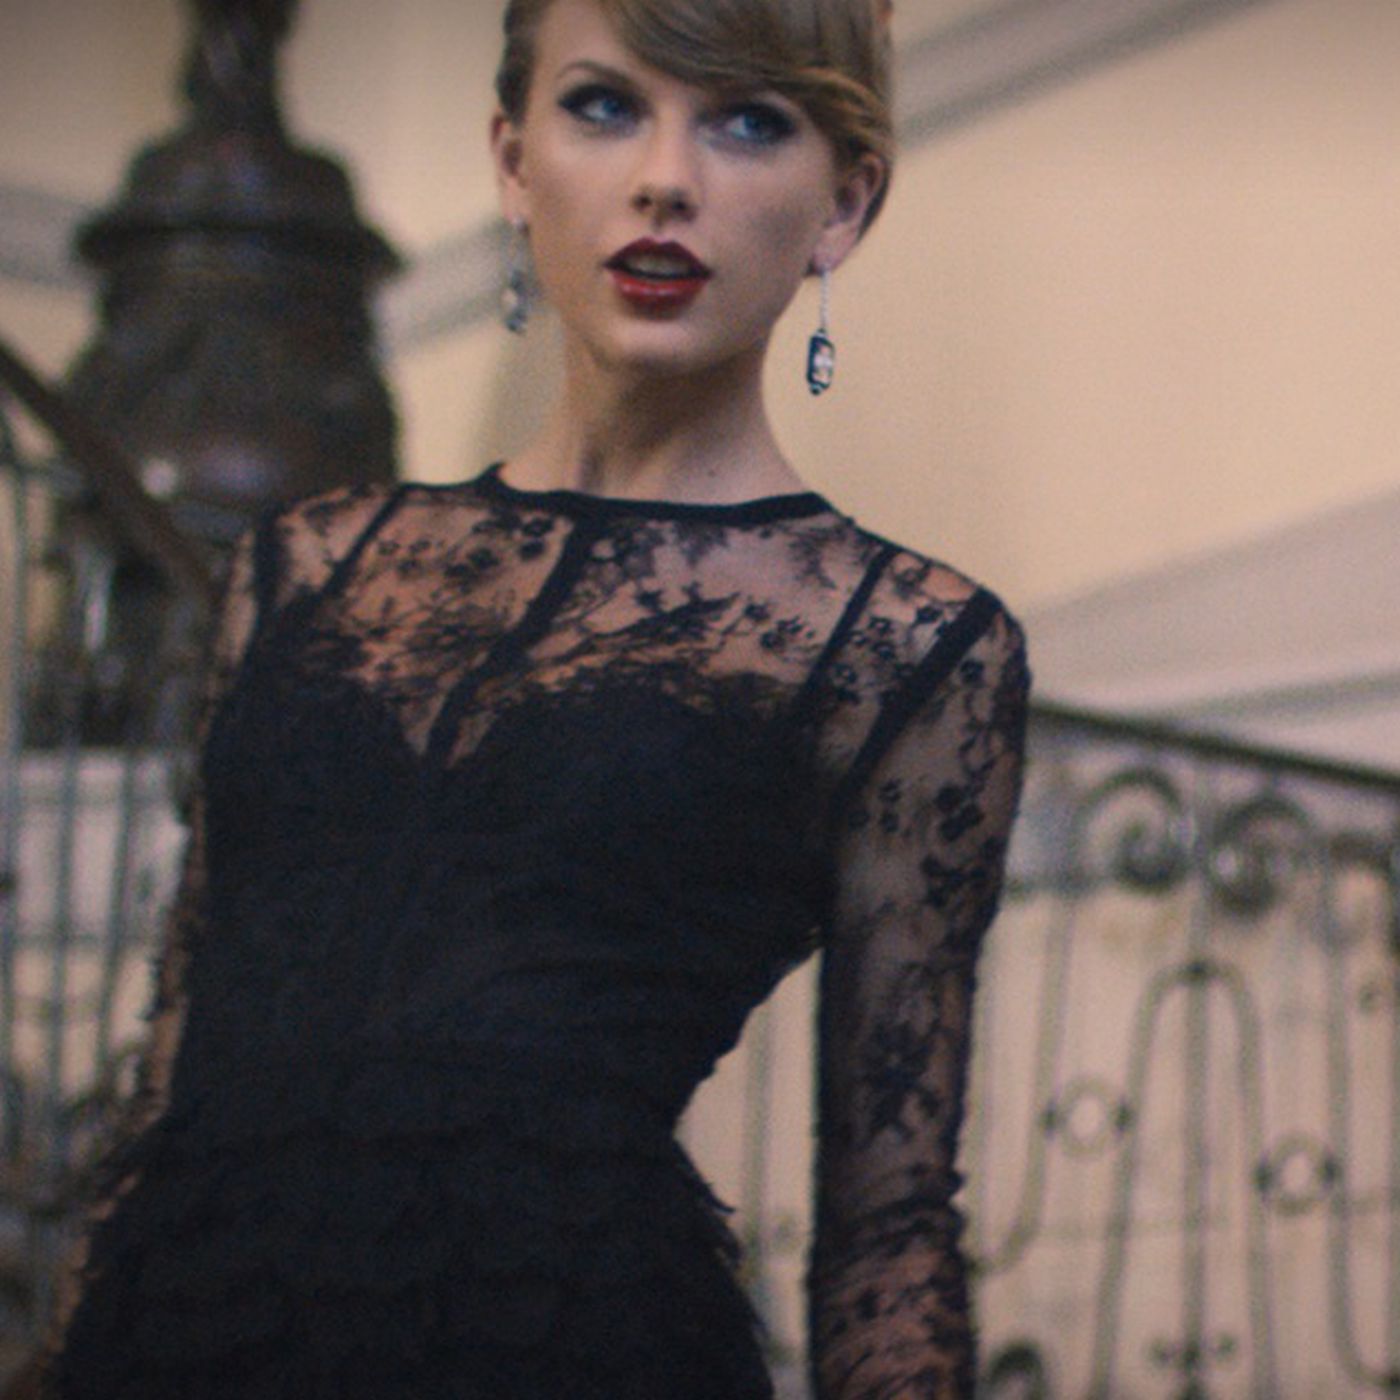 Taylor Swift's 'Blank Space' is now an iOS / Android game —